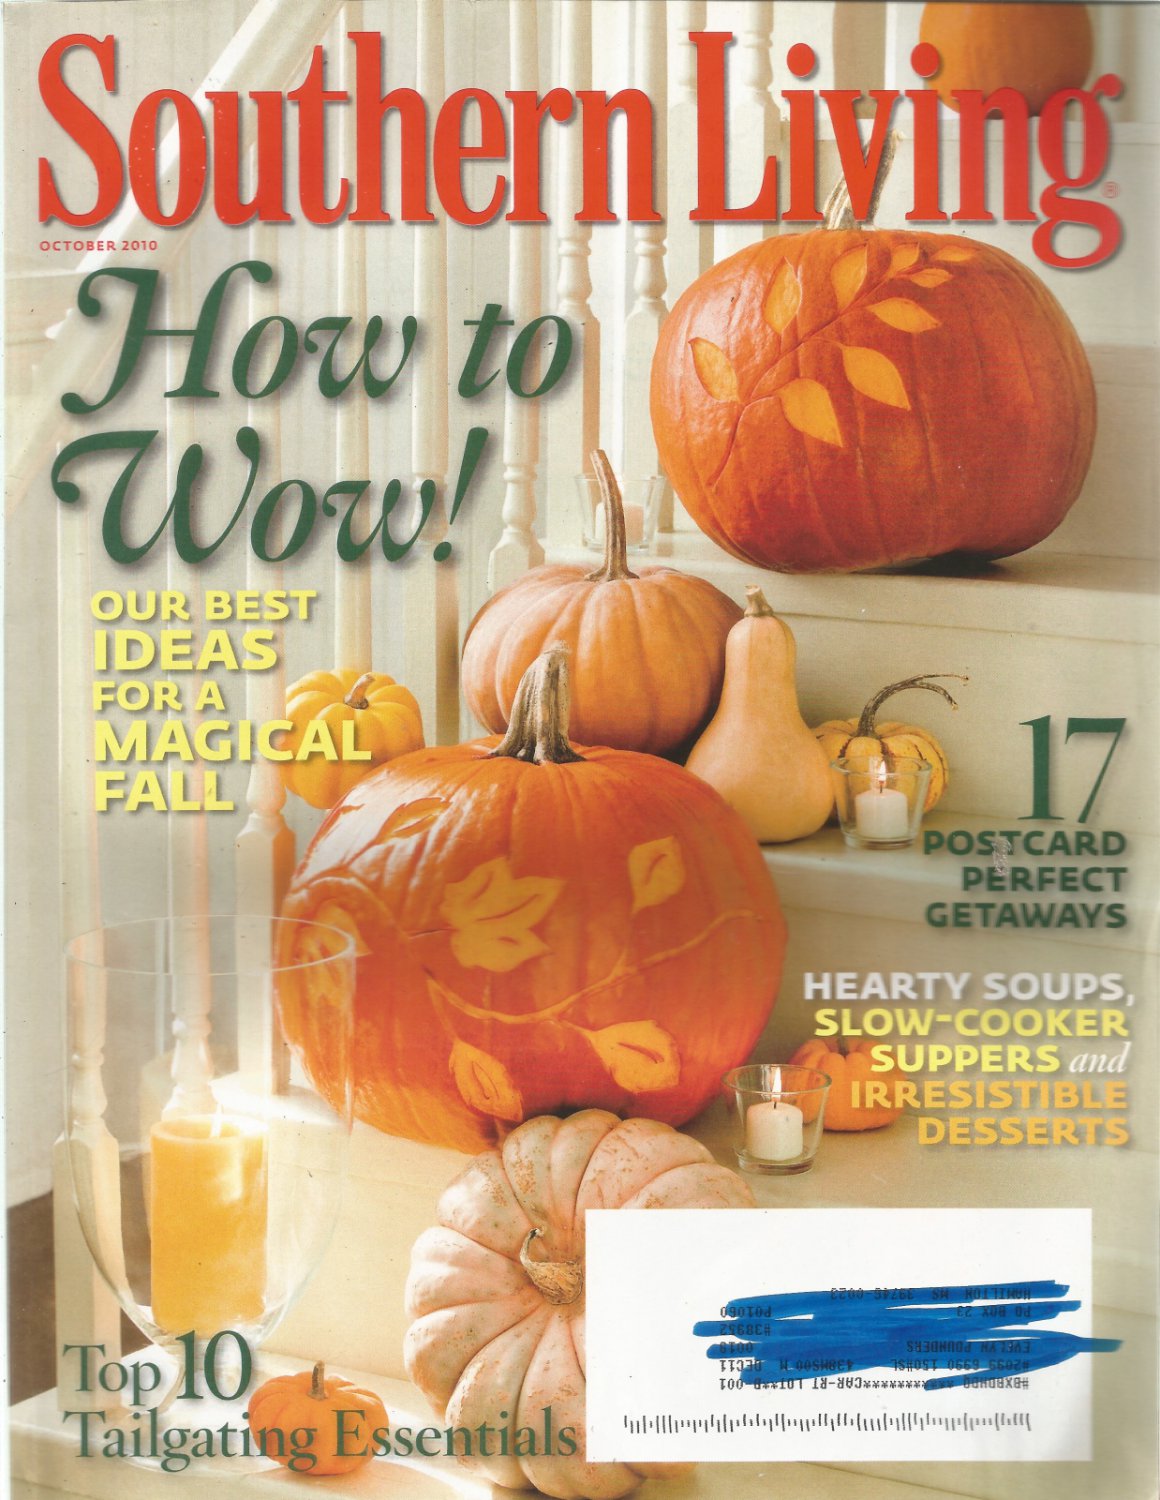 Southern Living magazine October 2010 ideas for a magical fall